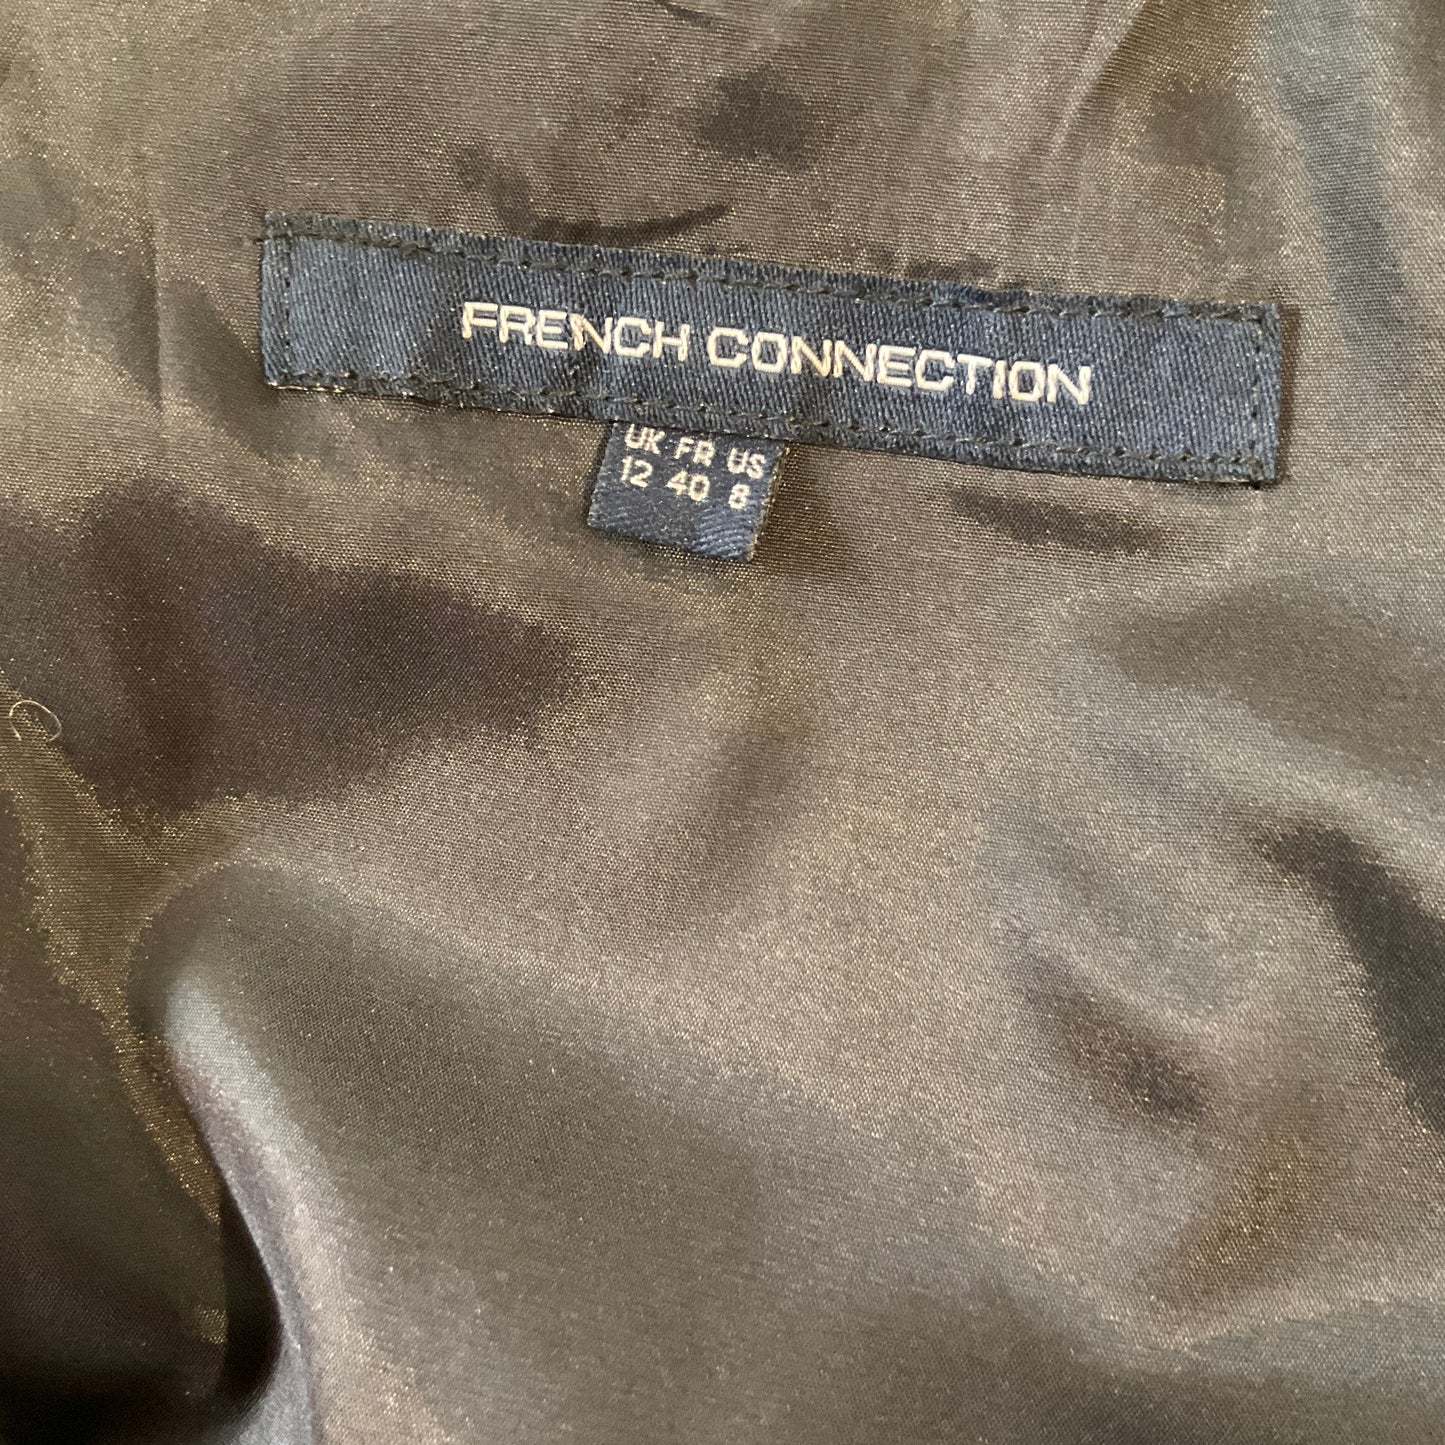 French Connection - Dress